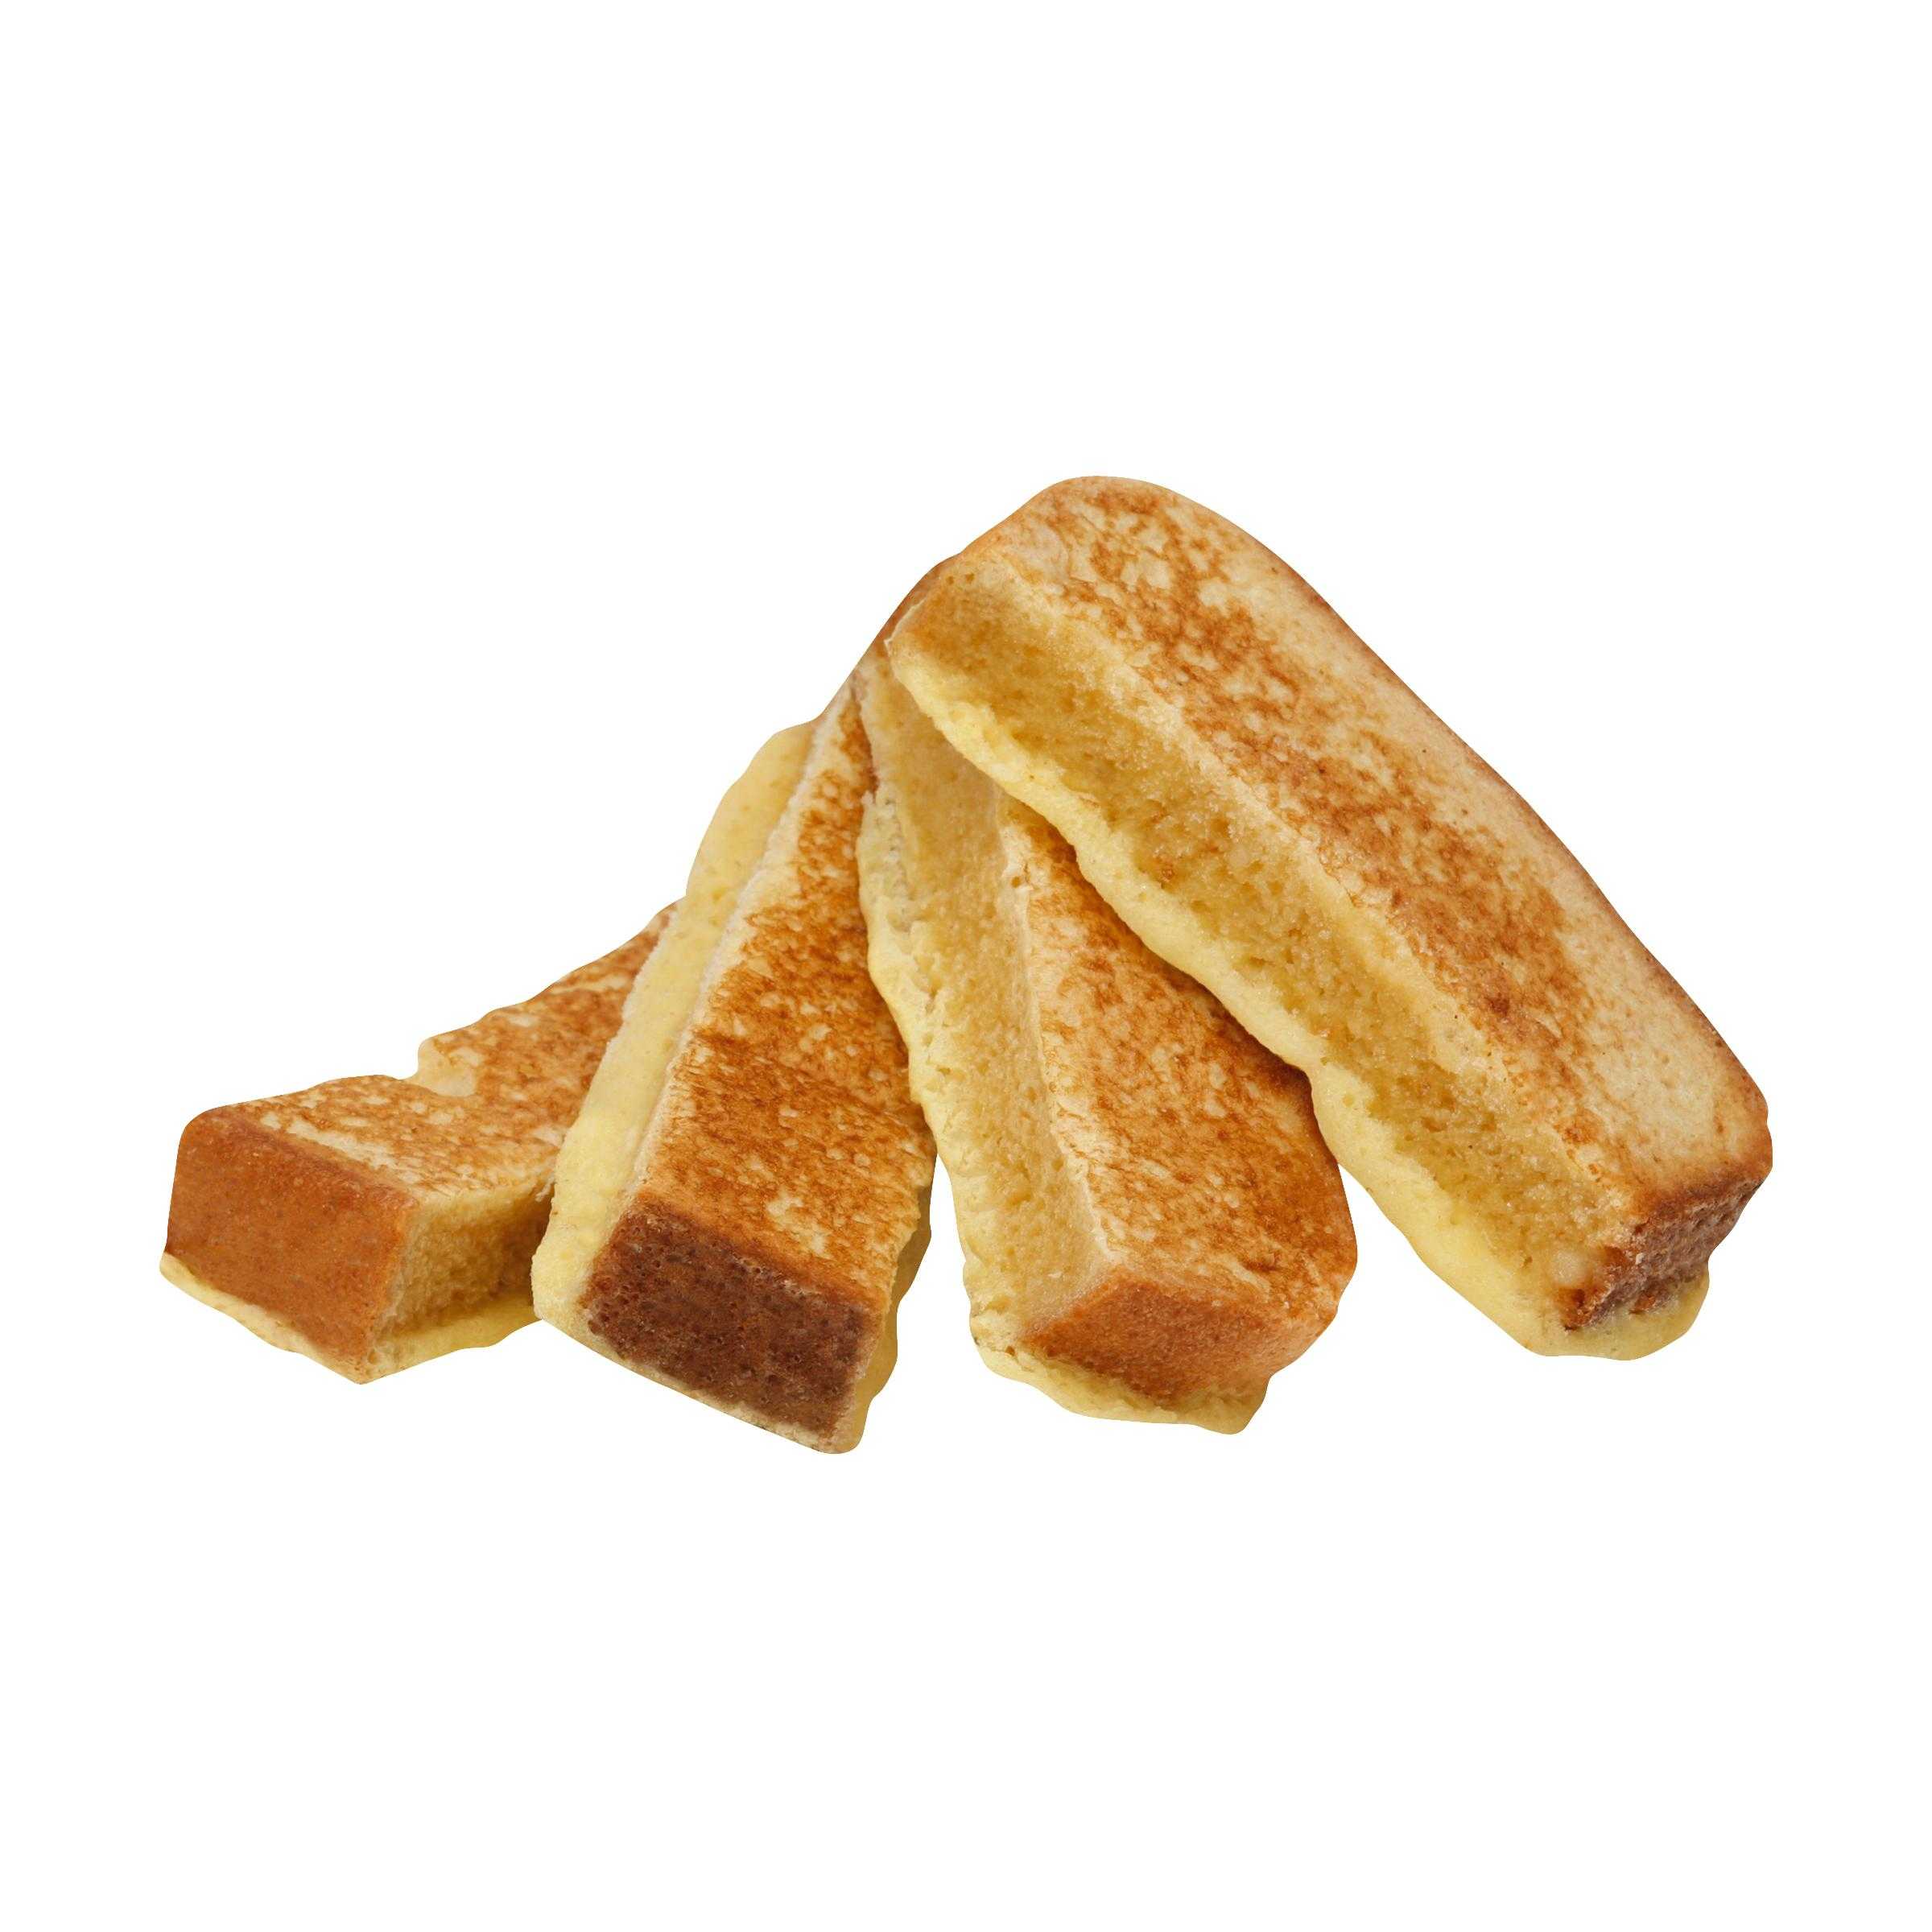 Papetti’s® Fully Cooked Plain French Toast Sticks, 100/2.6 Oz